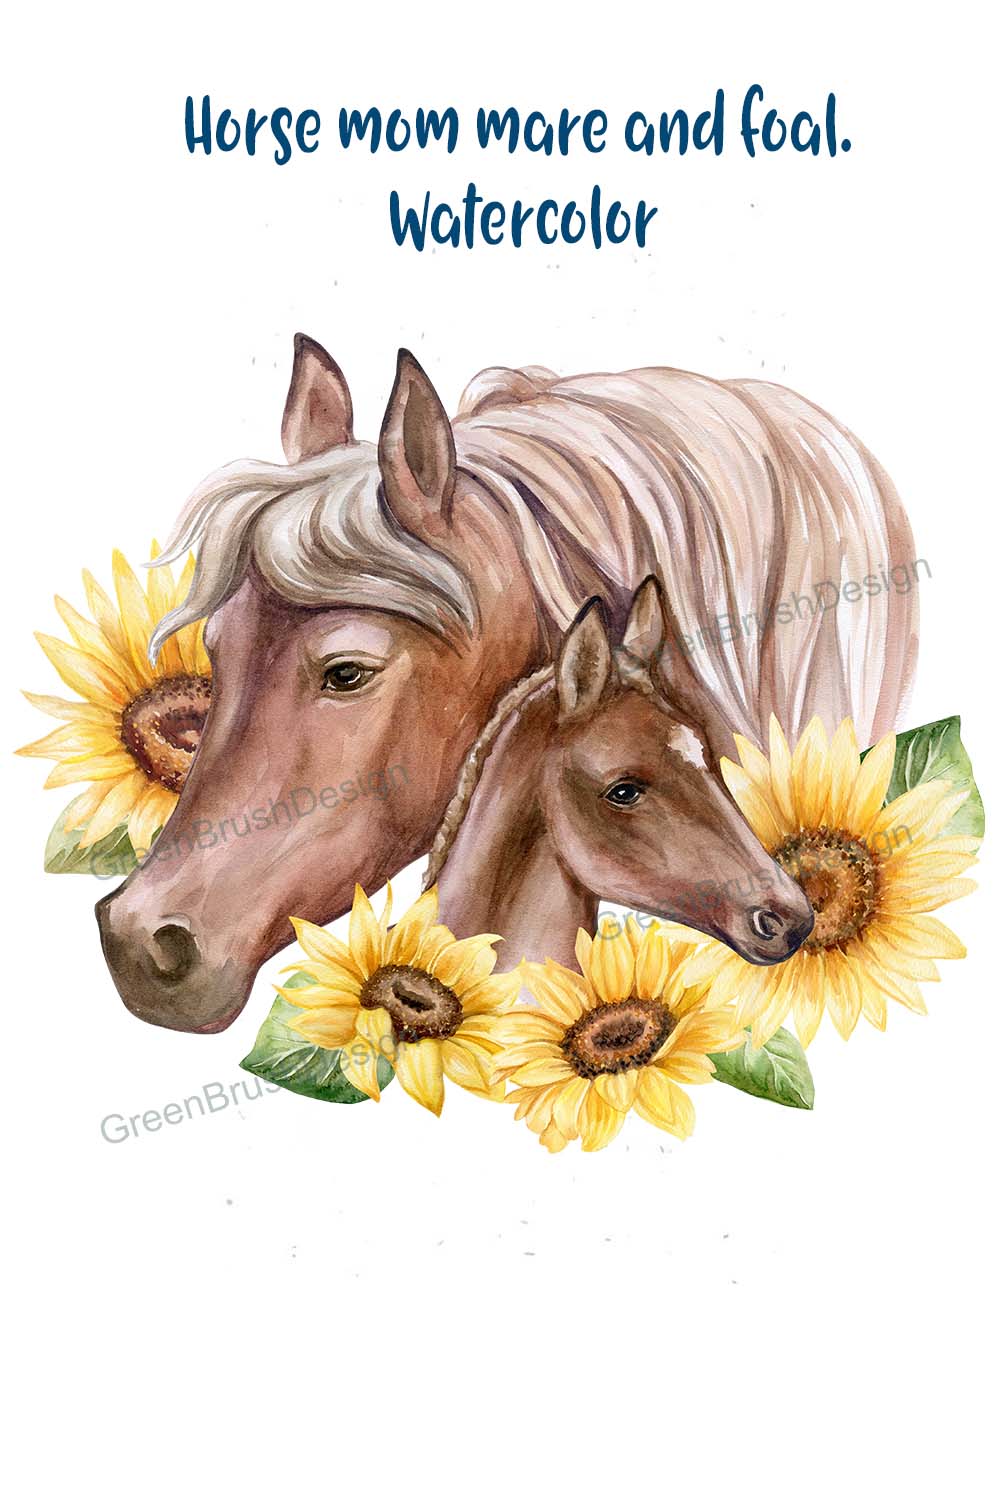 Watercolor Horse Mom Mare and Foal pinterest.